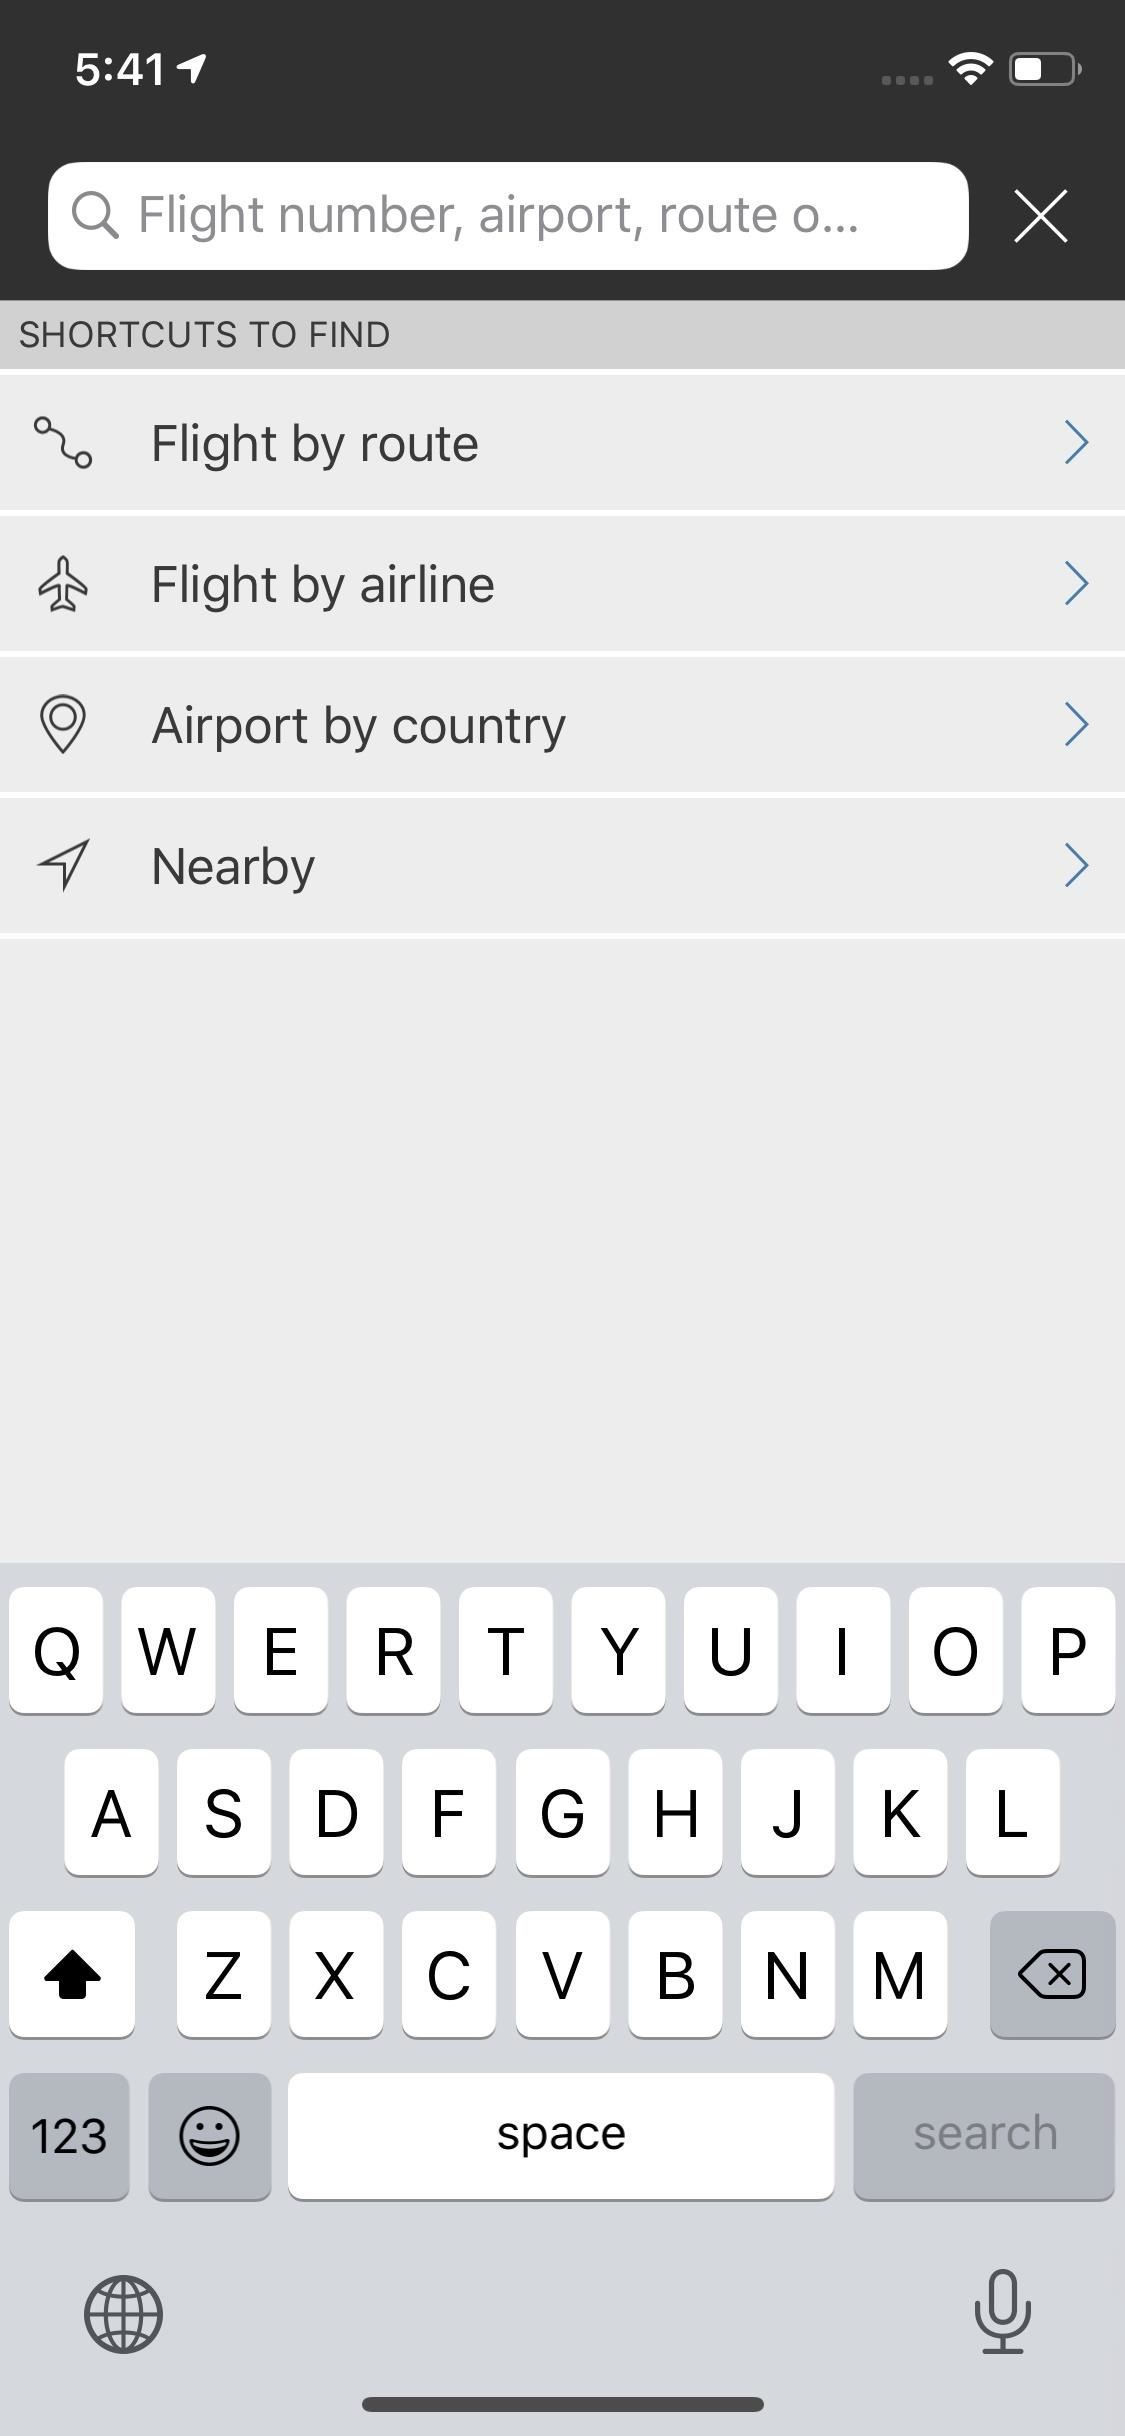 How to Track ADS-B Equipped Aircraft on Your Smartphone